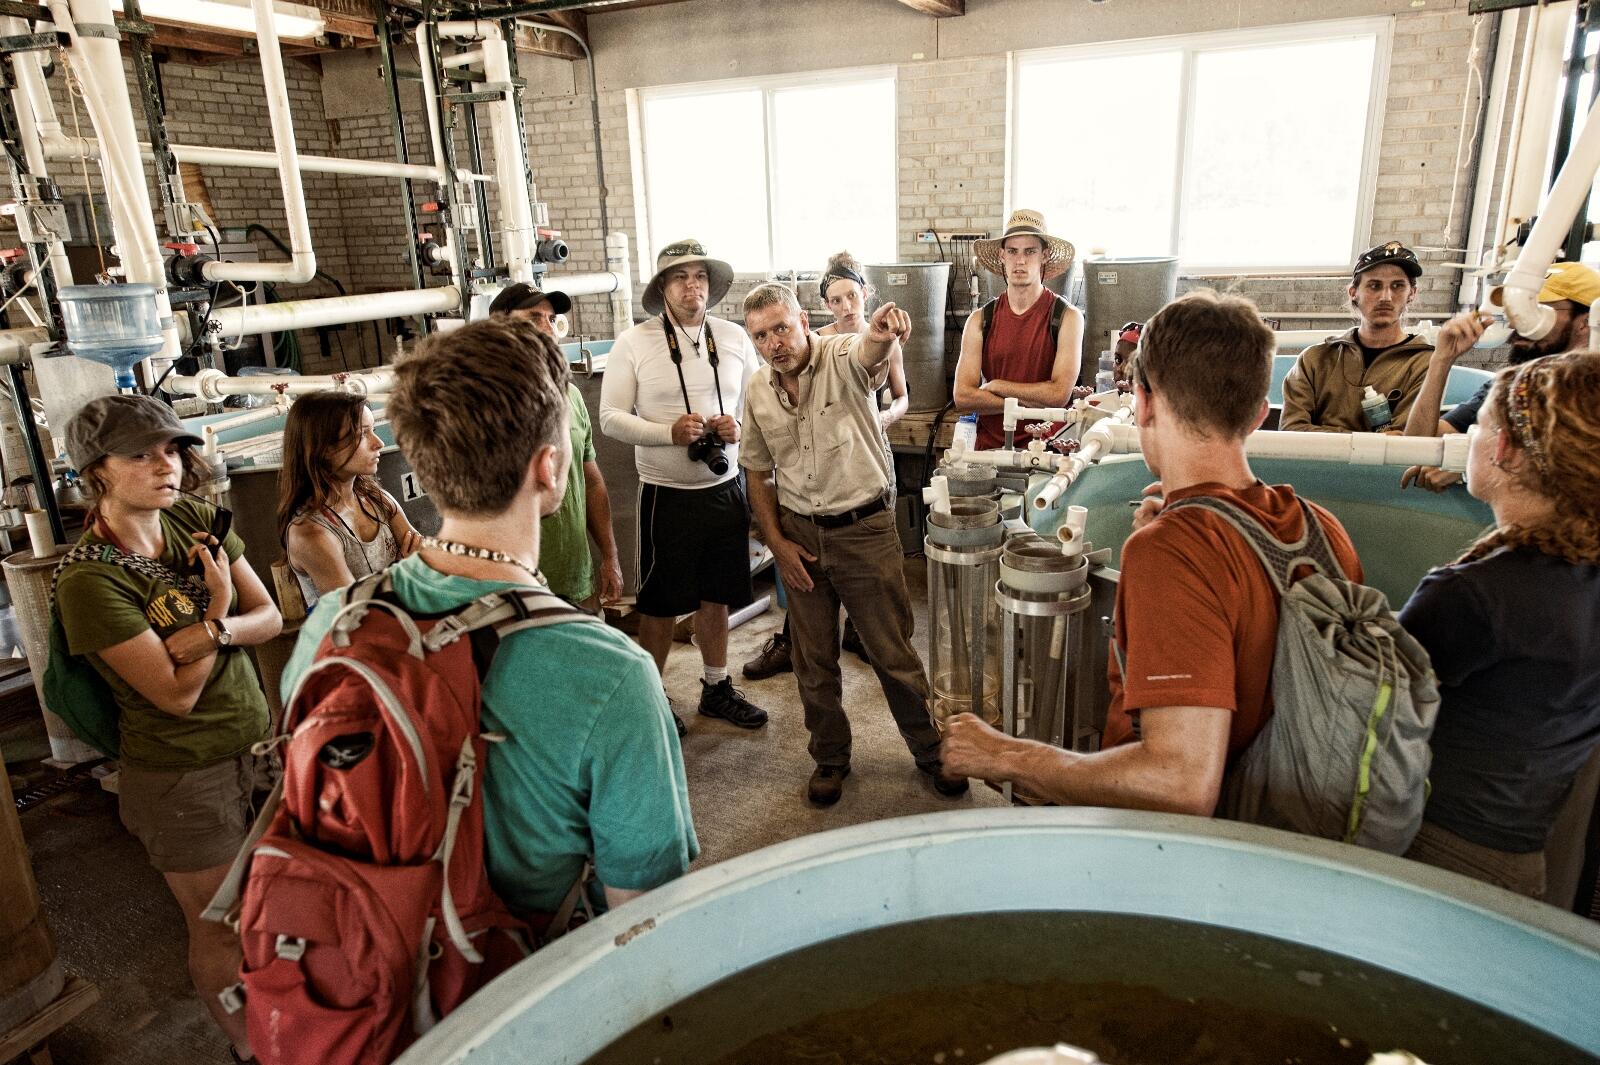 While camping at the VCU Rice Rivers Center, the class tours the nearby Harrison Lake National Fish Hatchery, a U.S. Fish and Wildlife Service facility. Photo by Allen Jones, VCU University Marketing.